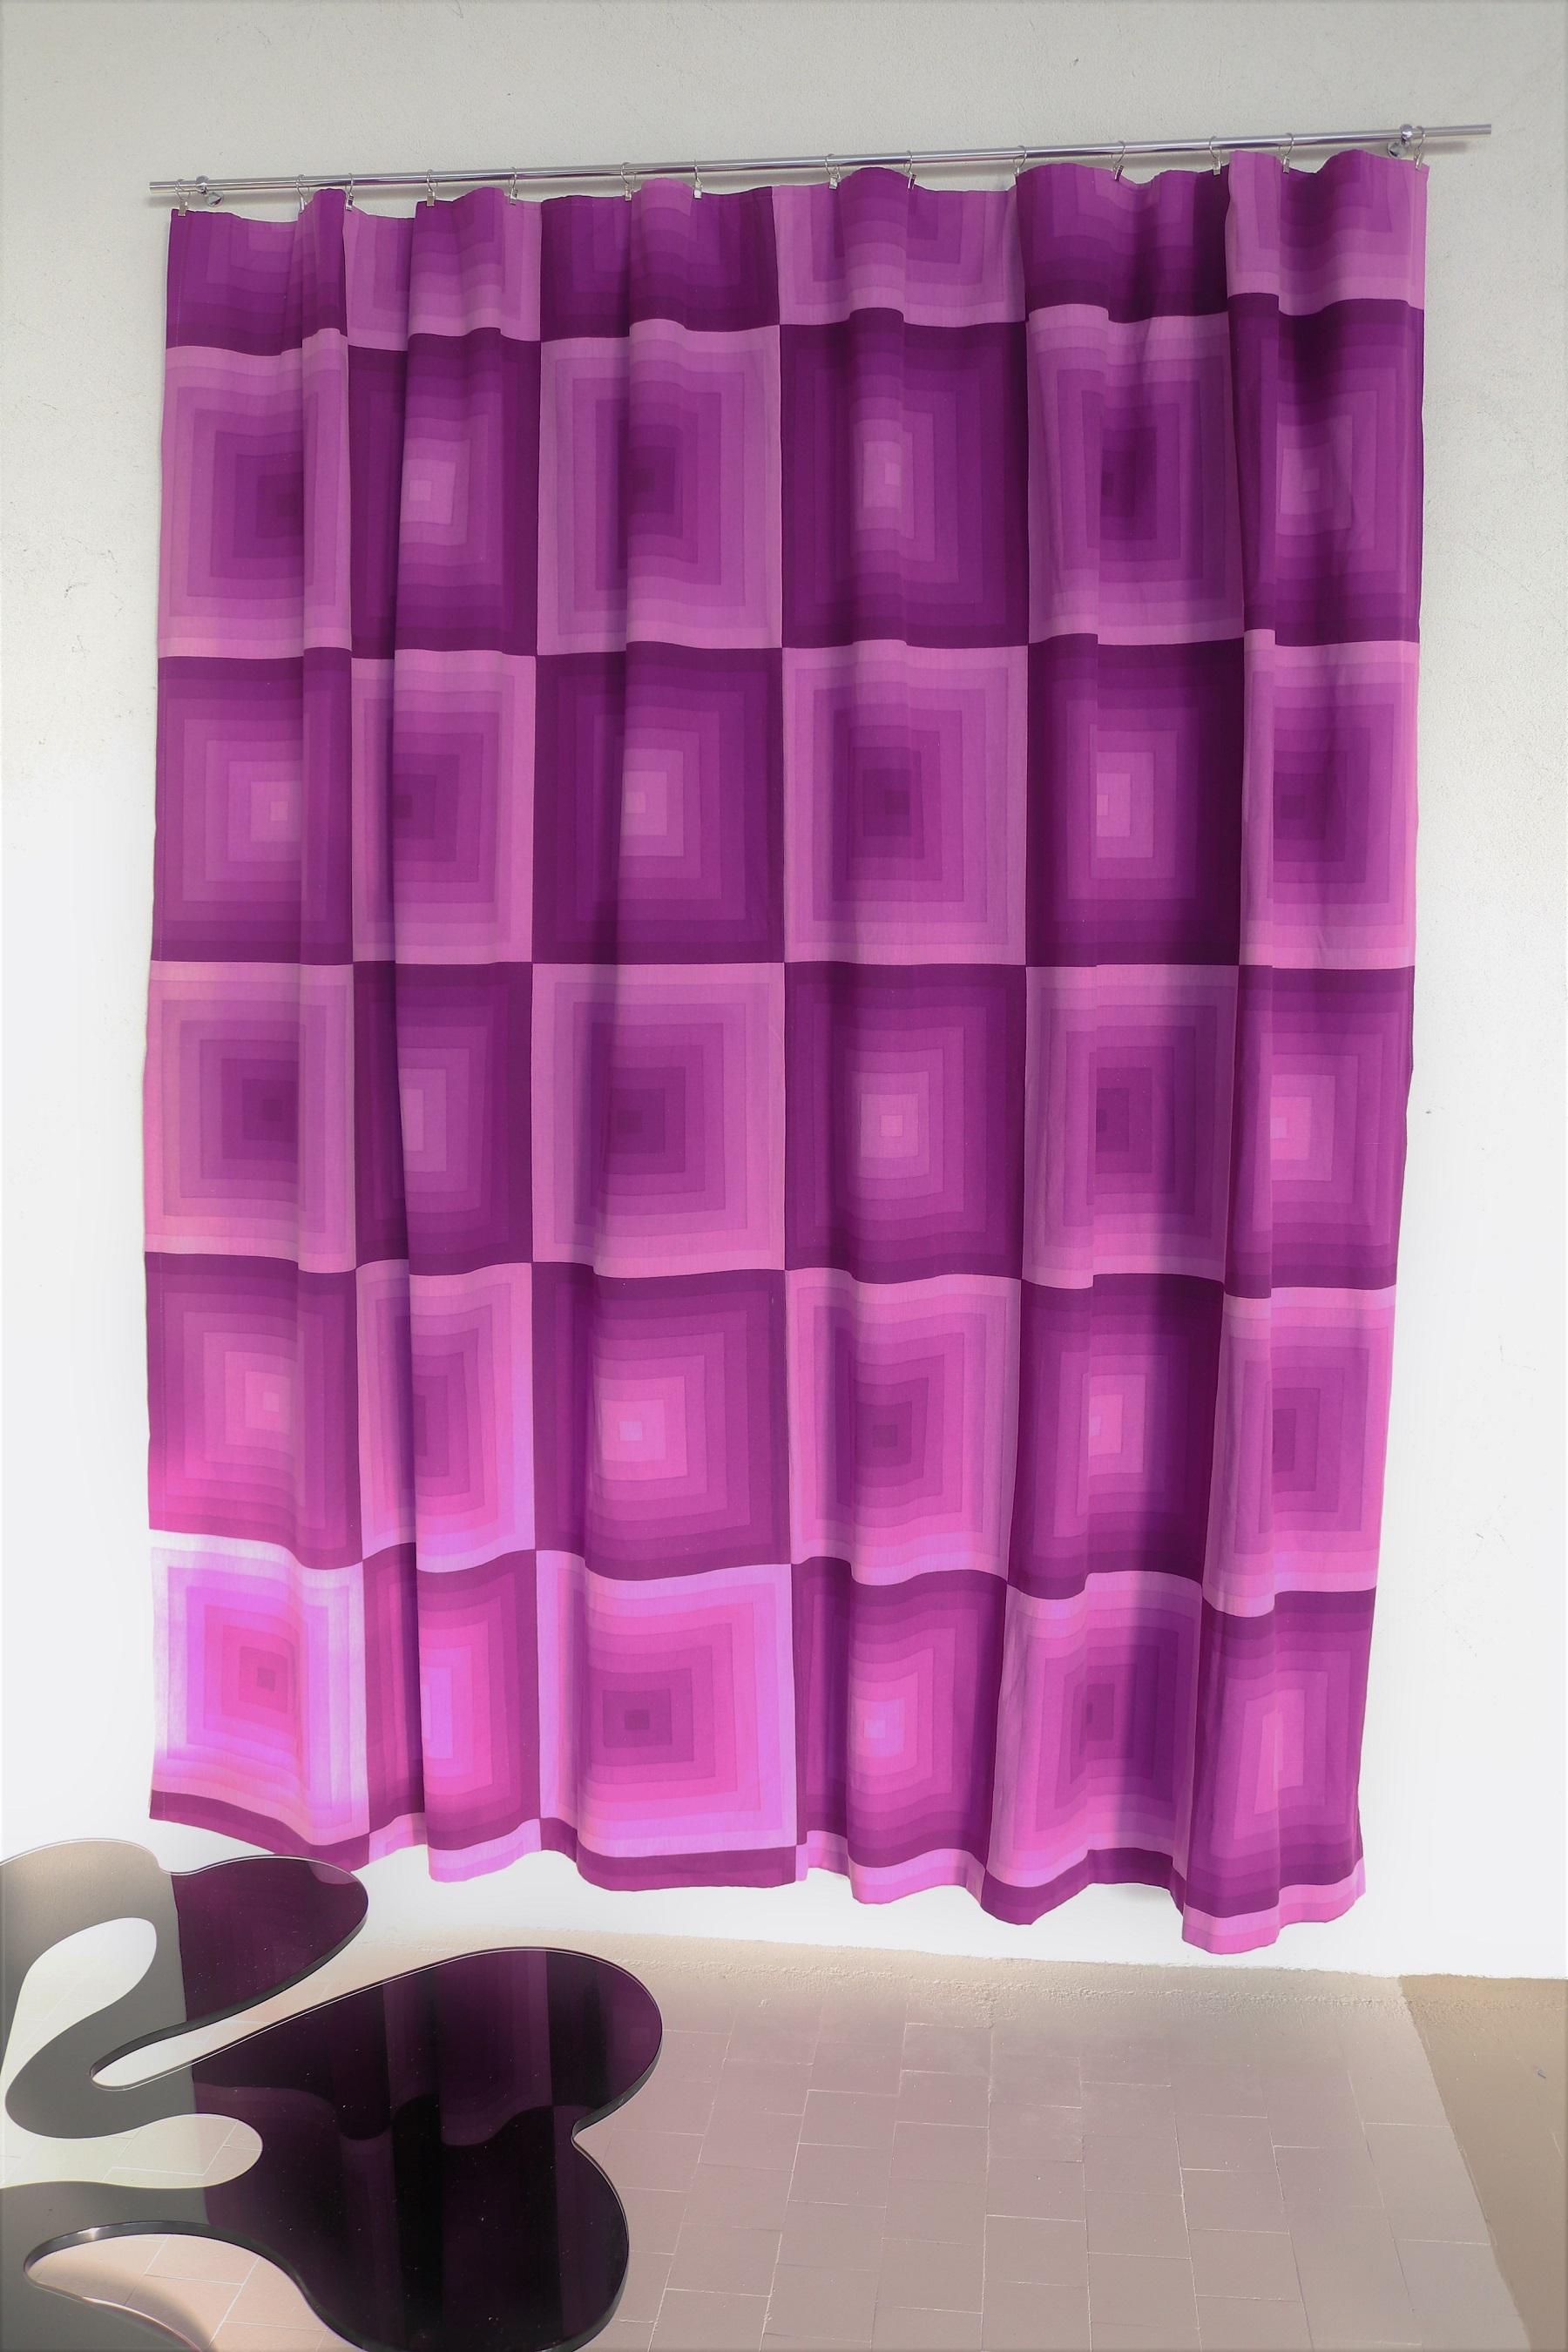 Late 20th Century Verner Panton Curtain Panel, Tapestry, Fabric by Mira-X Collection, 1960s For Sale